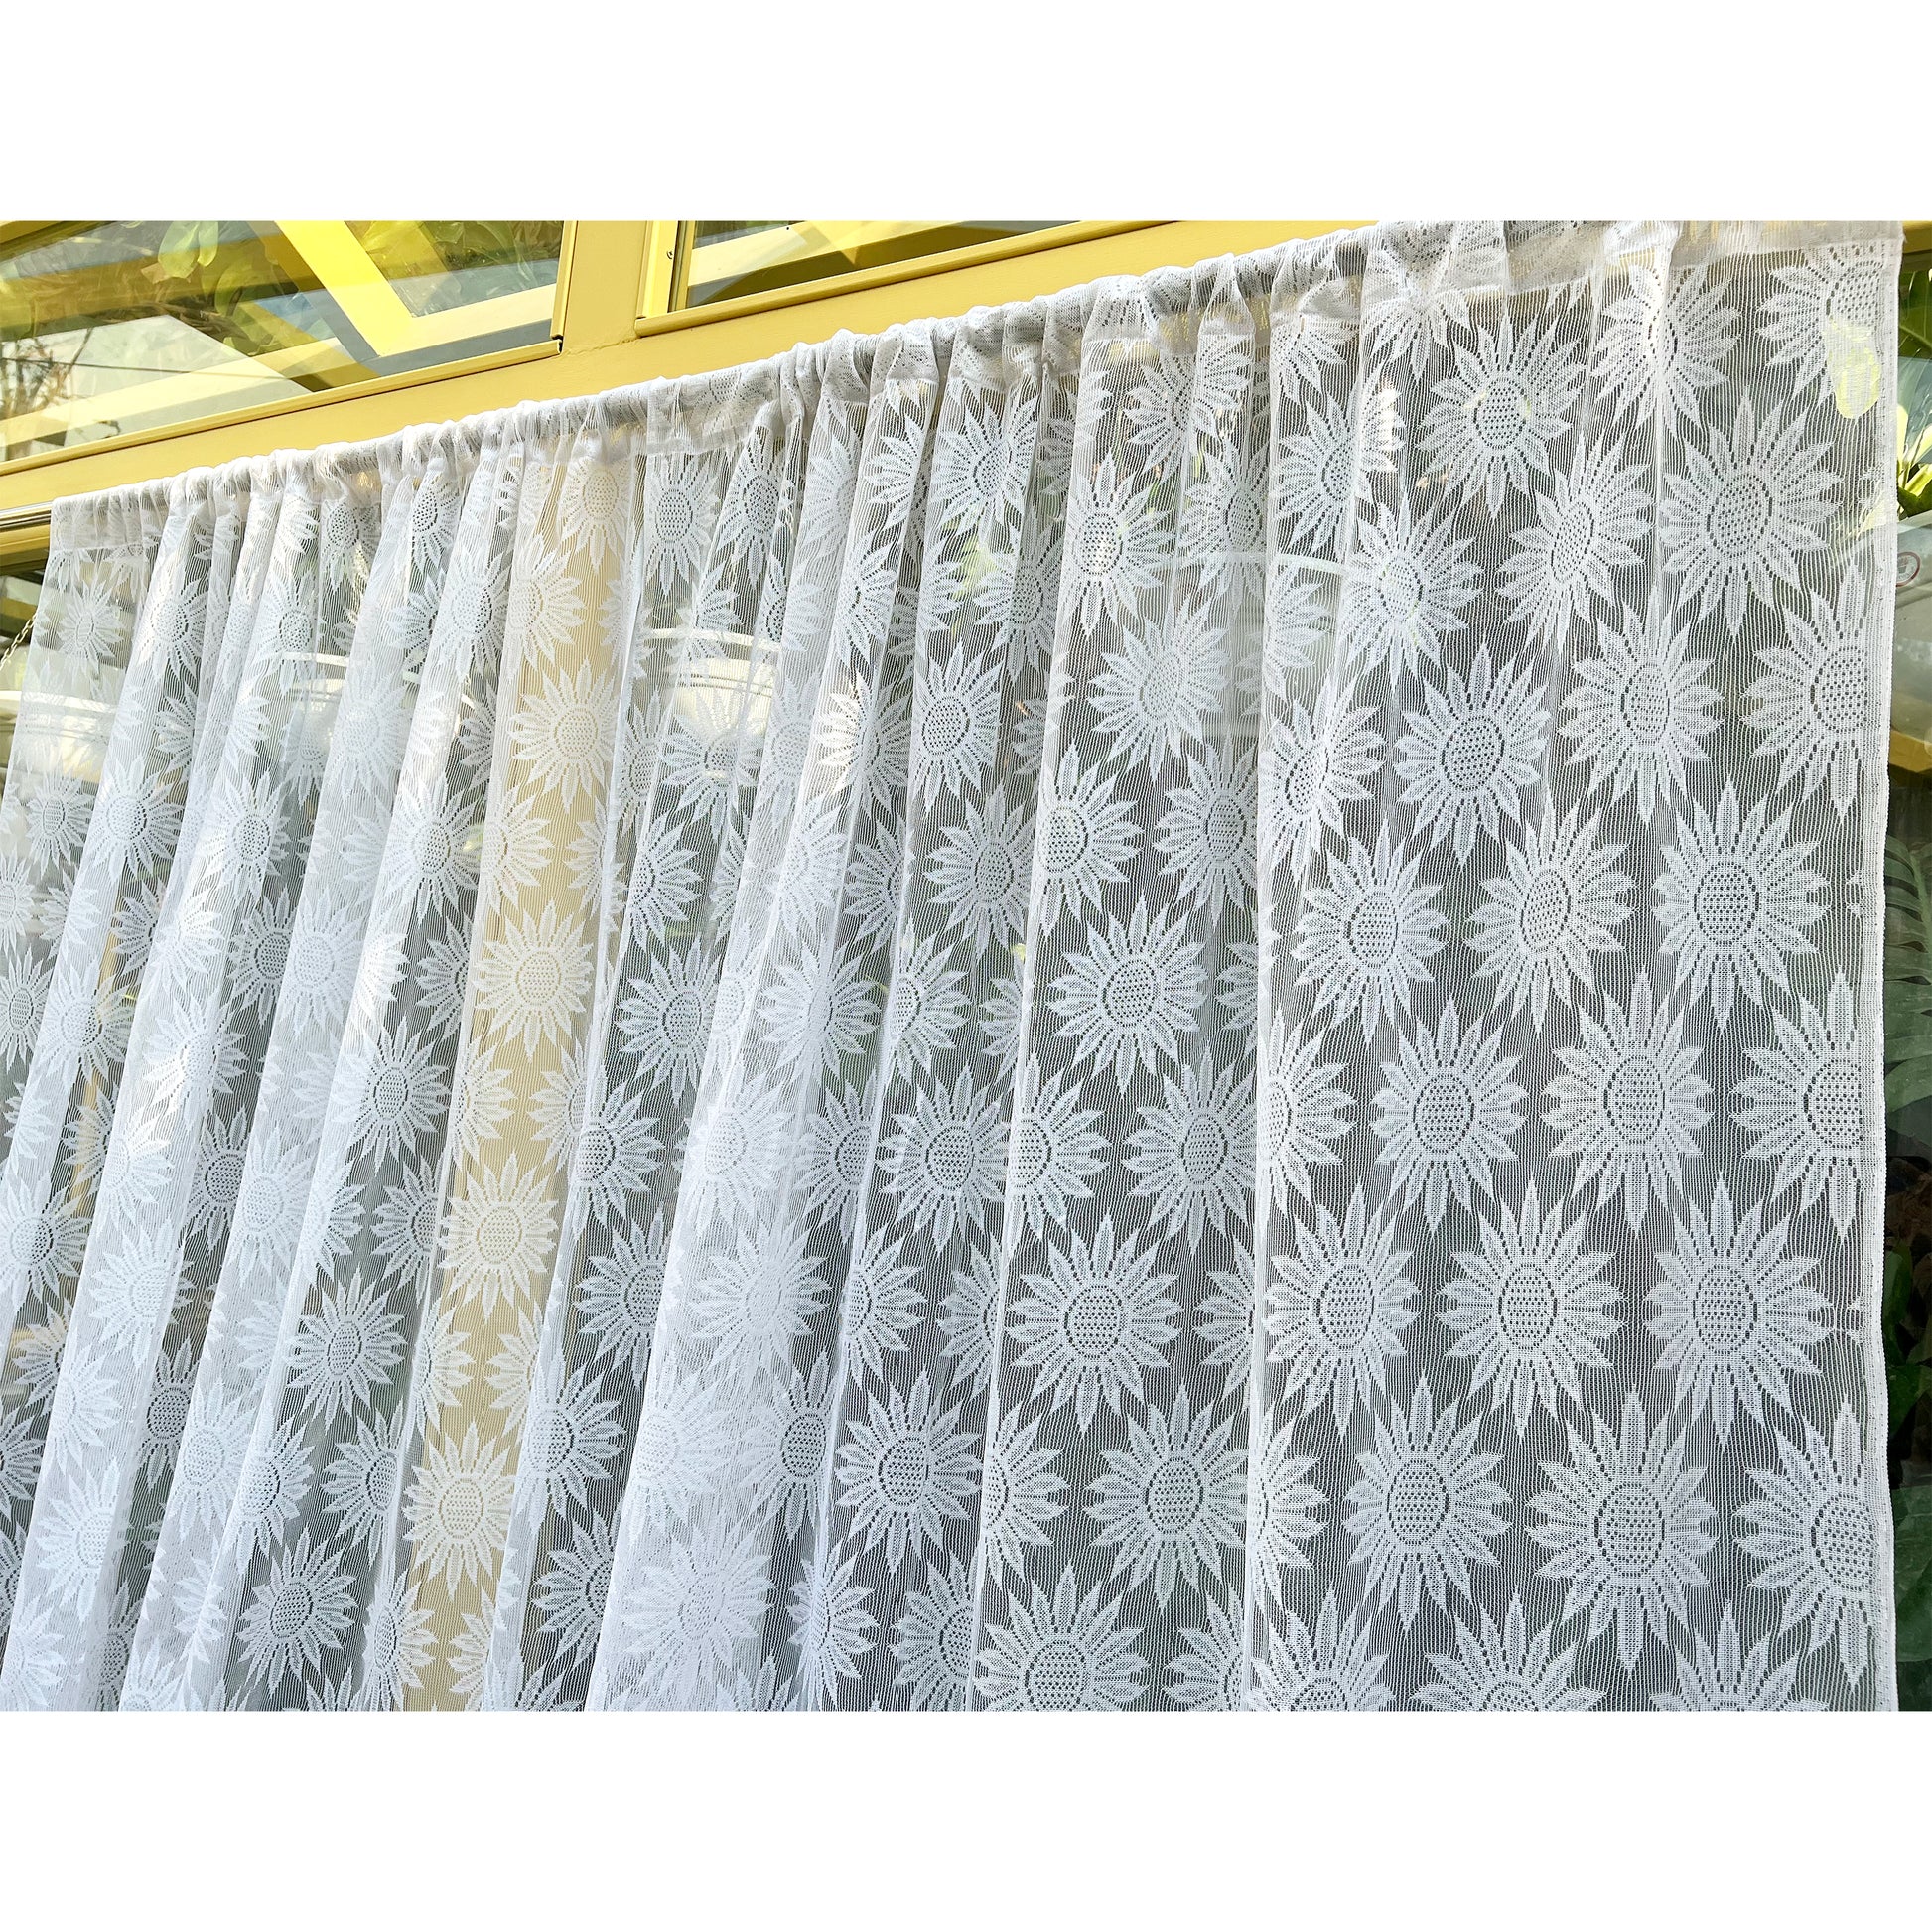 white-net-curtains-online-for-windows